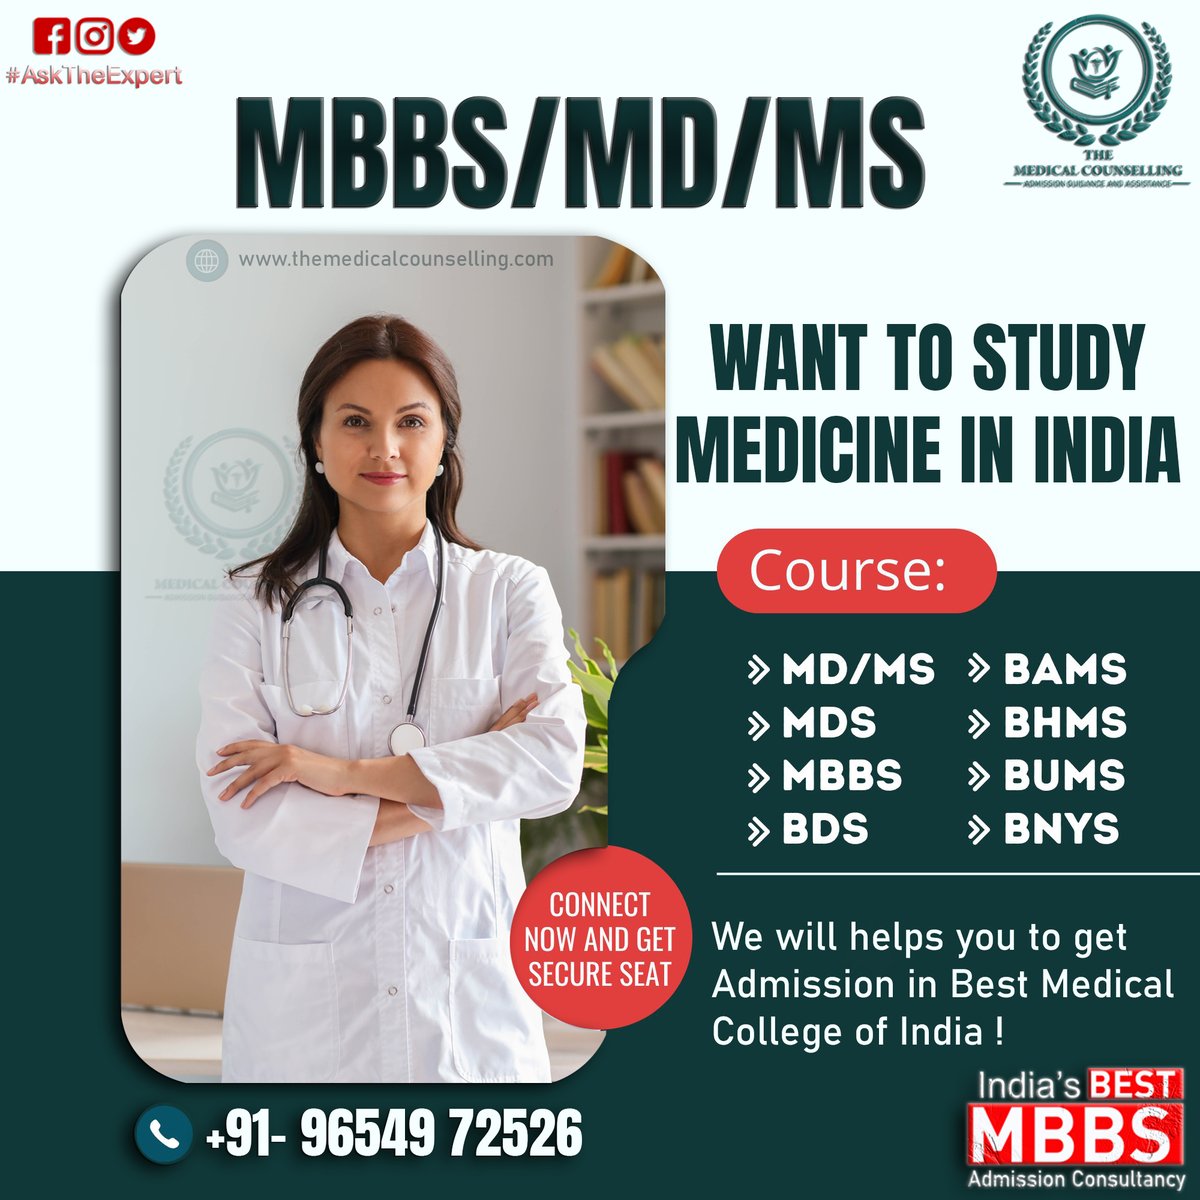 Want to study MEDICINE in India ??
MBBS / MD/MS / MDS
We will helps you to get Admission in Best Medical College of India !

For more details : 
☎️ 𝐂𝐚𝐥𝐥 𝐔𝐬 𝐍𝐨𝐰: 
Delhi : +91- 96549-72526
 +91 99148 52526
🌐 themedicalcounselling.com
#mbbsadmission
#mbbs
#bams
#BDS
#bams